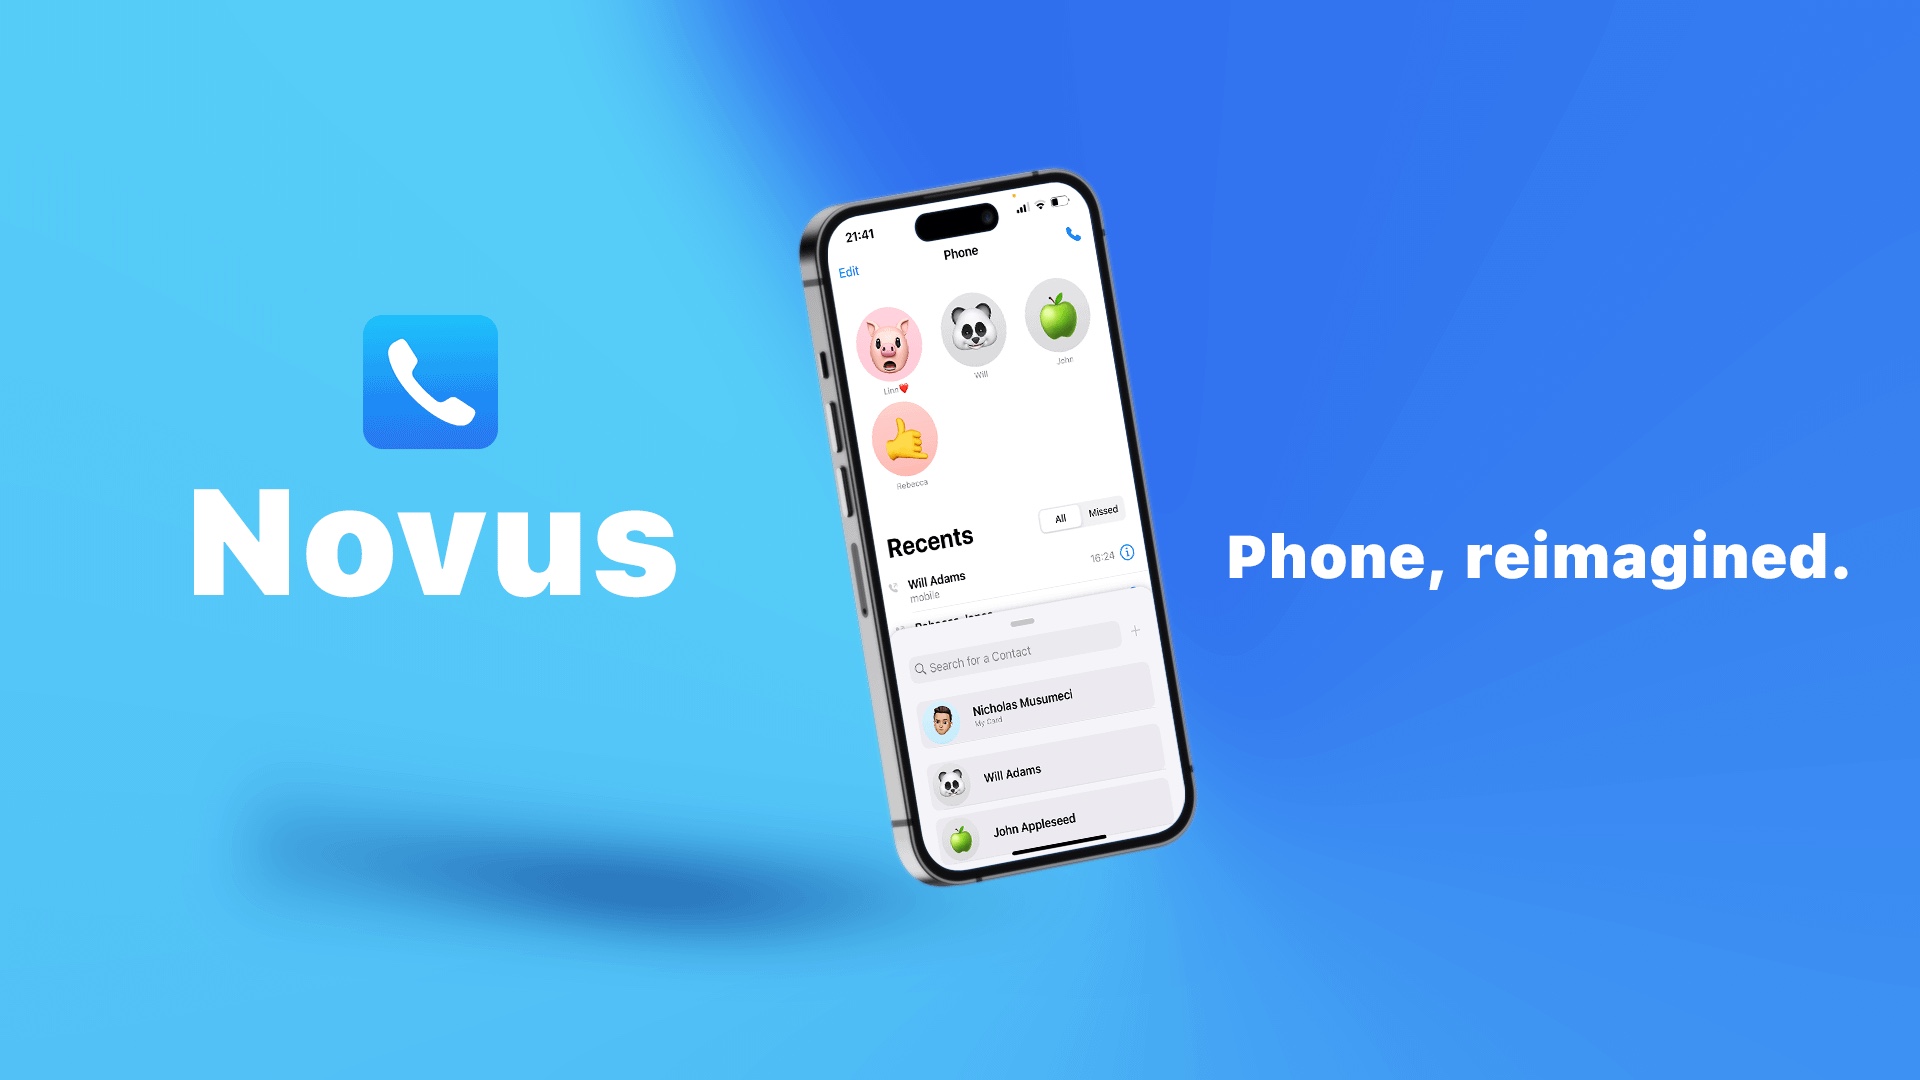 Novus reimagines the iPhone’s Phone app with a fully-unified user interface